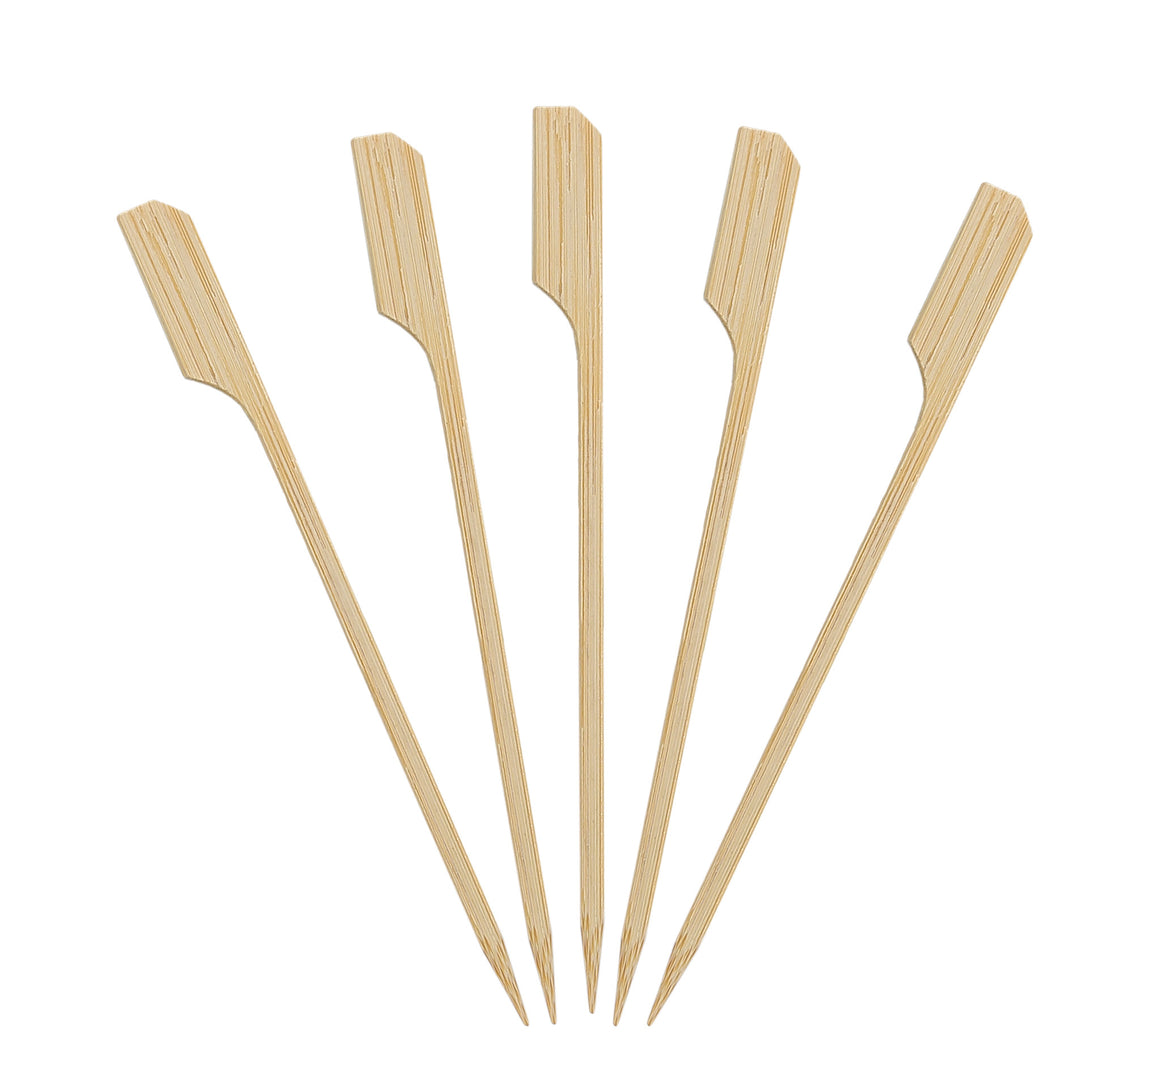 KingSeal Bamboo Wood Paddle Picks, Skewers. 4.5 Inch - Perfect for Appetizers and Cocktails